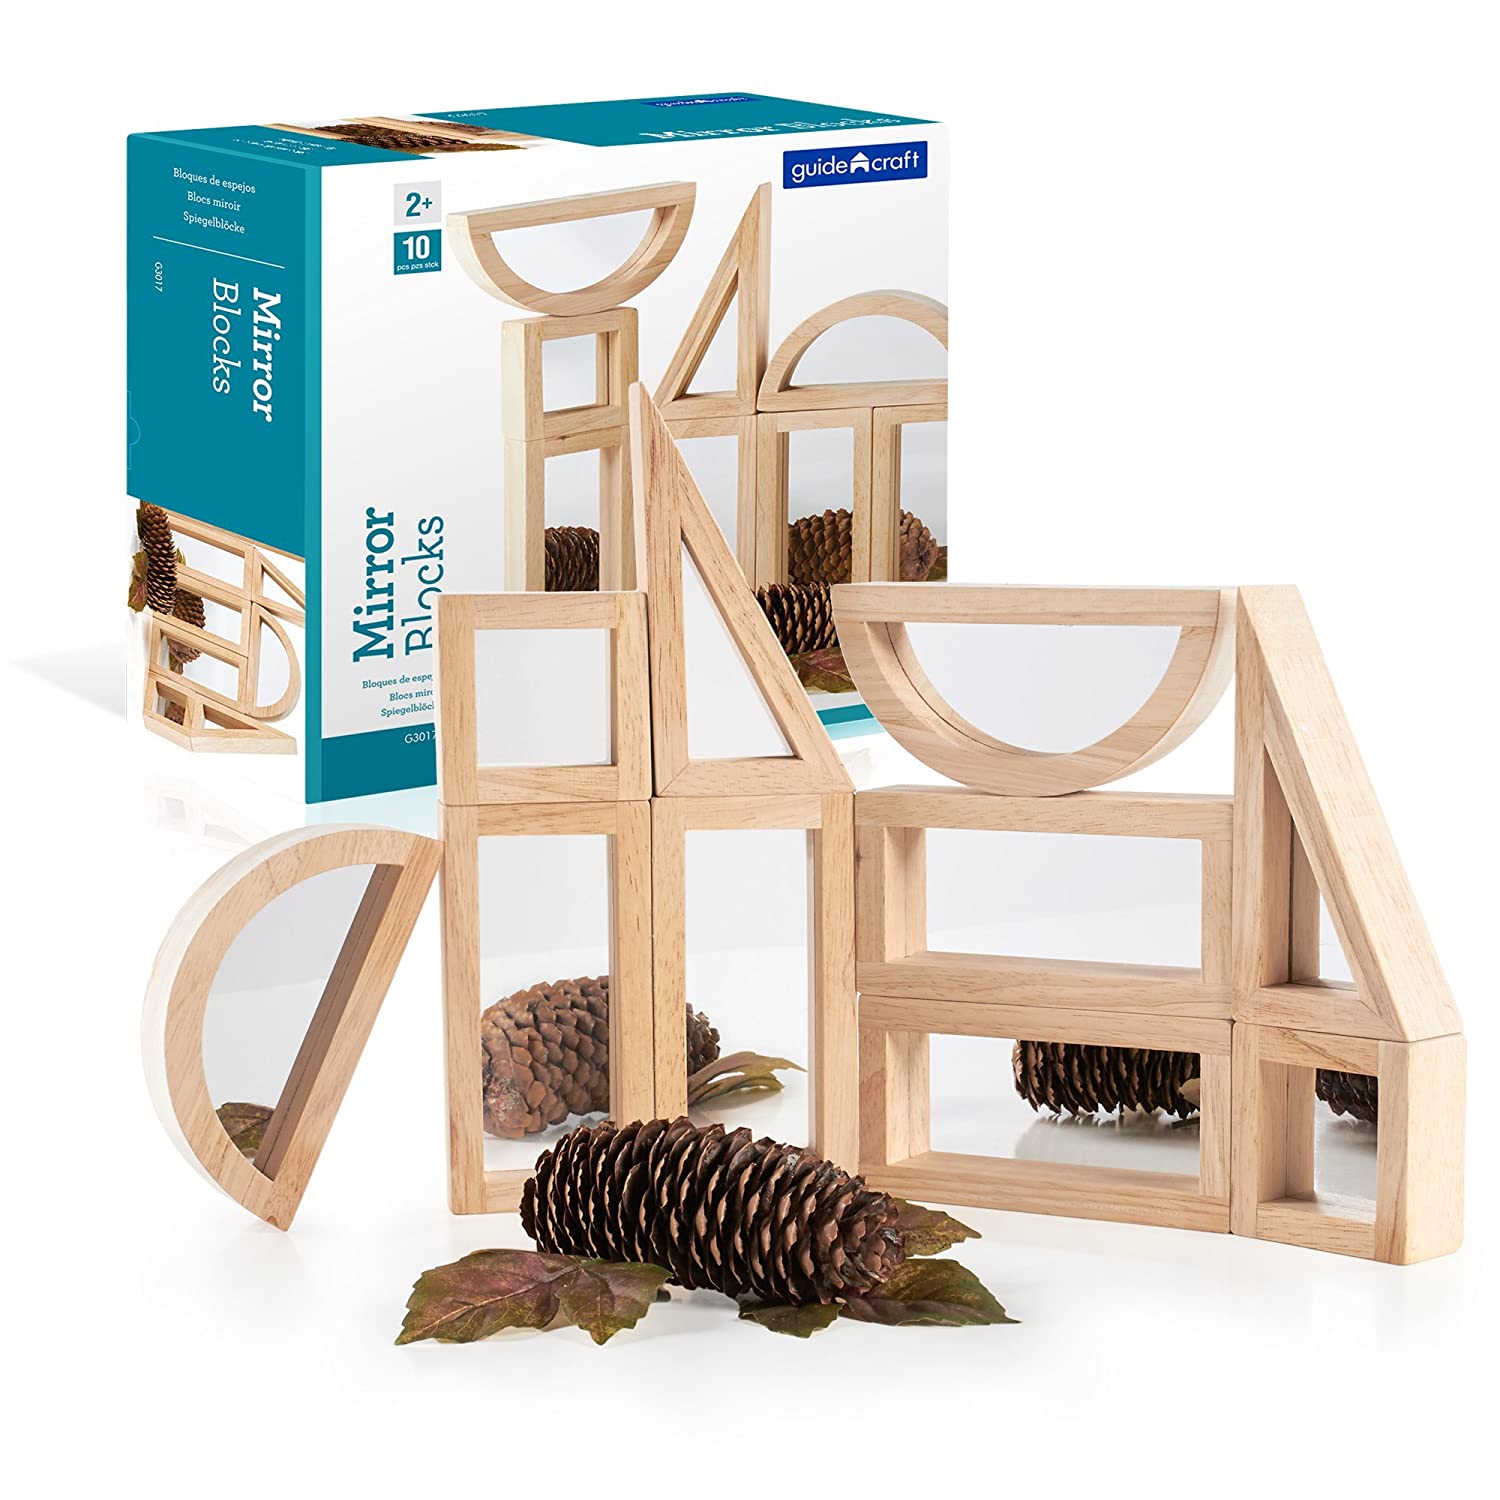 7 Best Baby Blocks 2023 - Buying Guide & Reviews 3